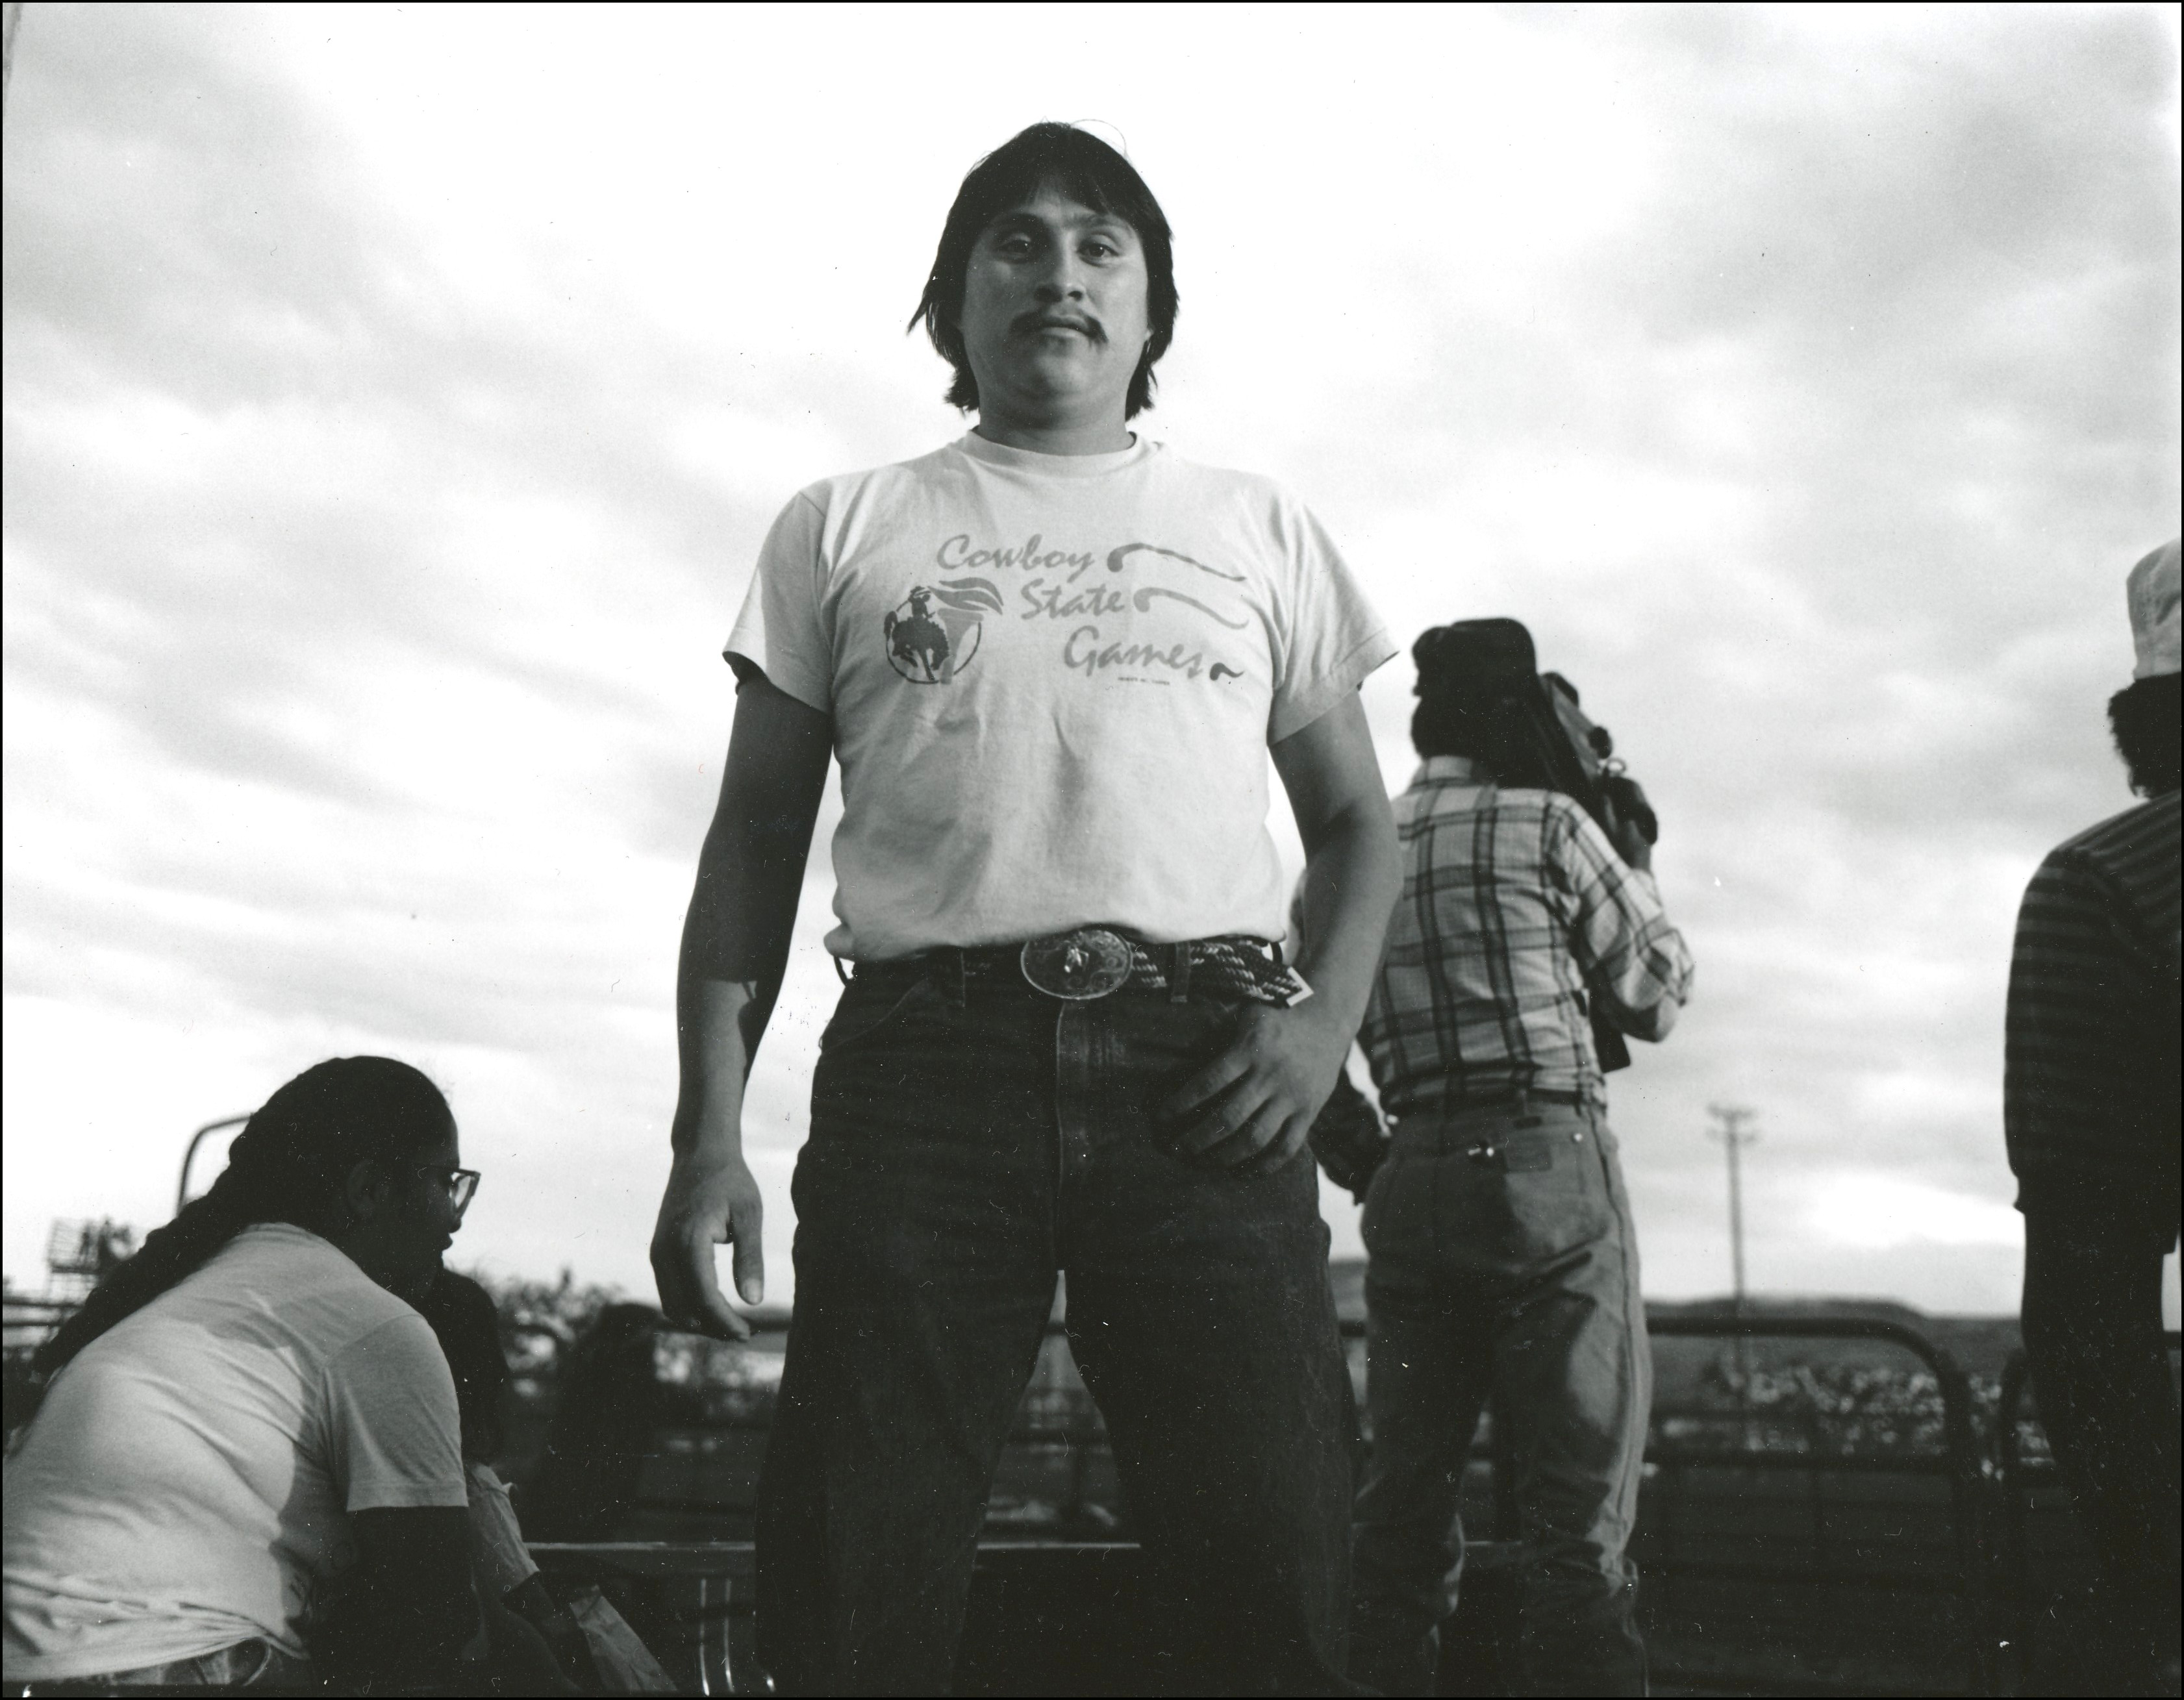 Native cowboy standing, wearing a t-shirt, western belt and buckle, and posing for camera, rodeo arena behind him. person sitting to his right and one standing with a video camera to his left.